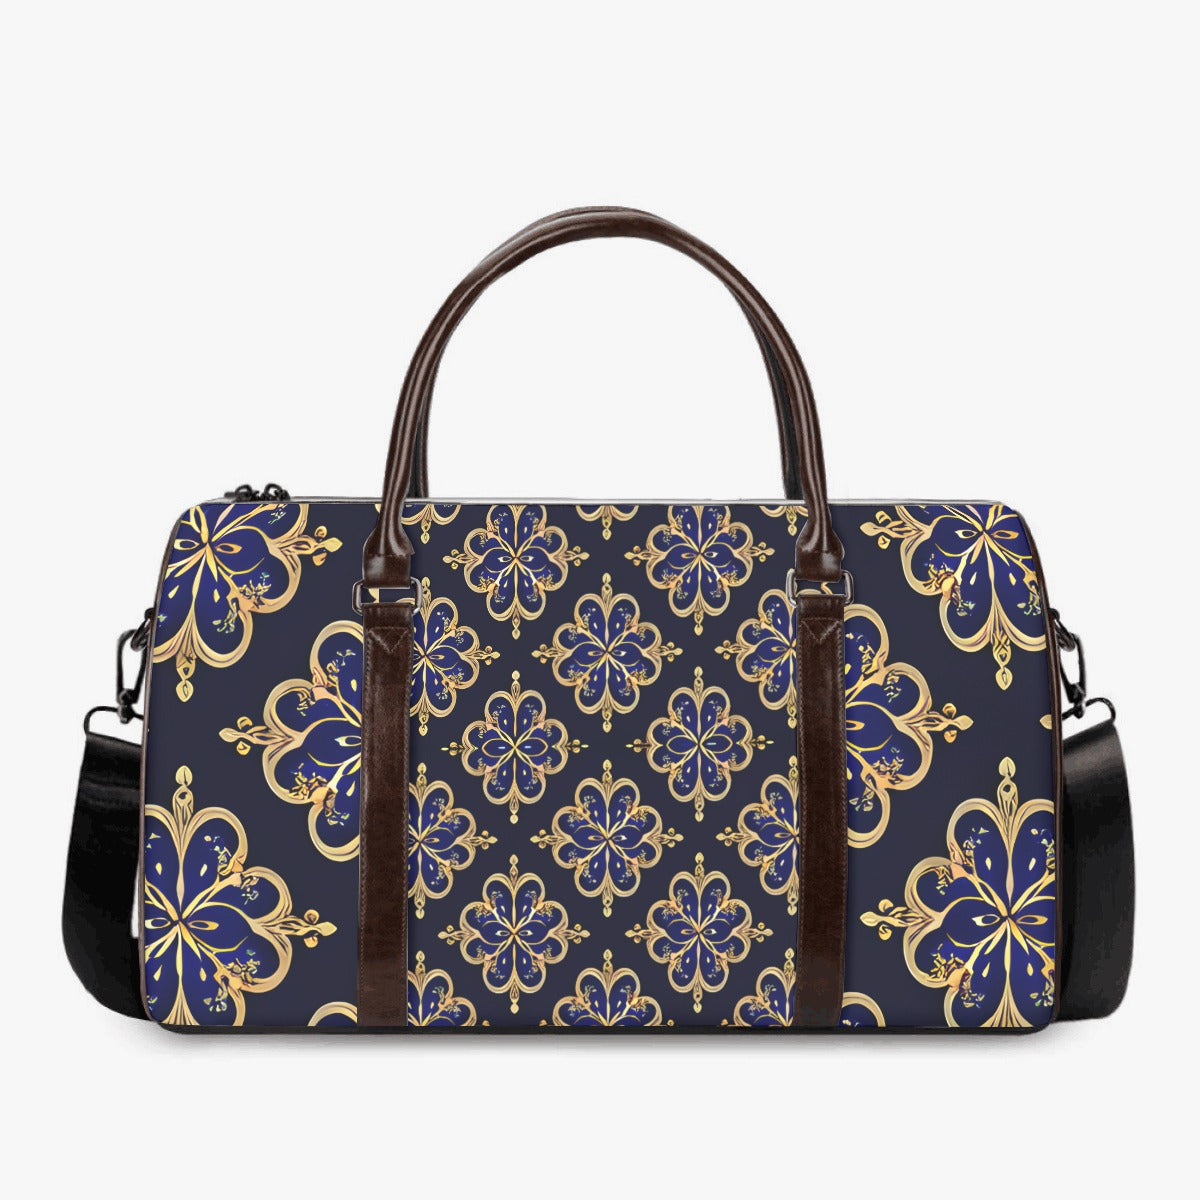 ANA COUPER "OUPE" (Blueberry) Duffle Bag